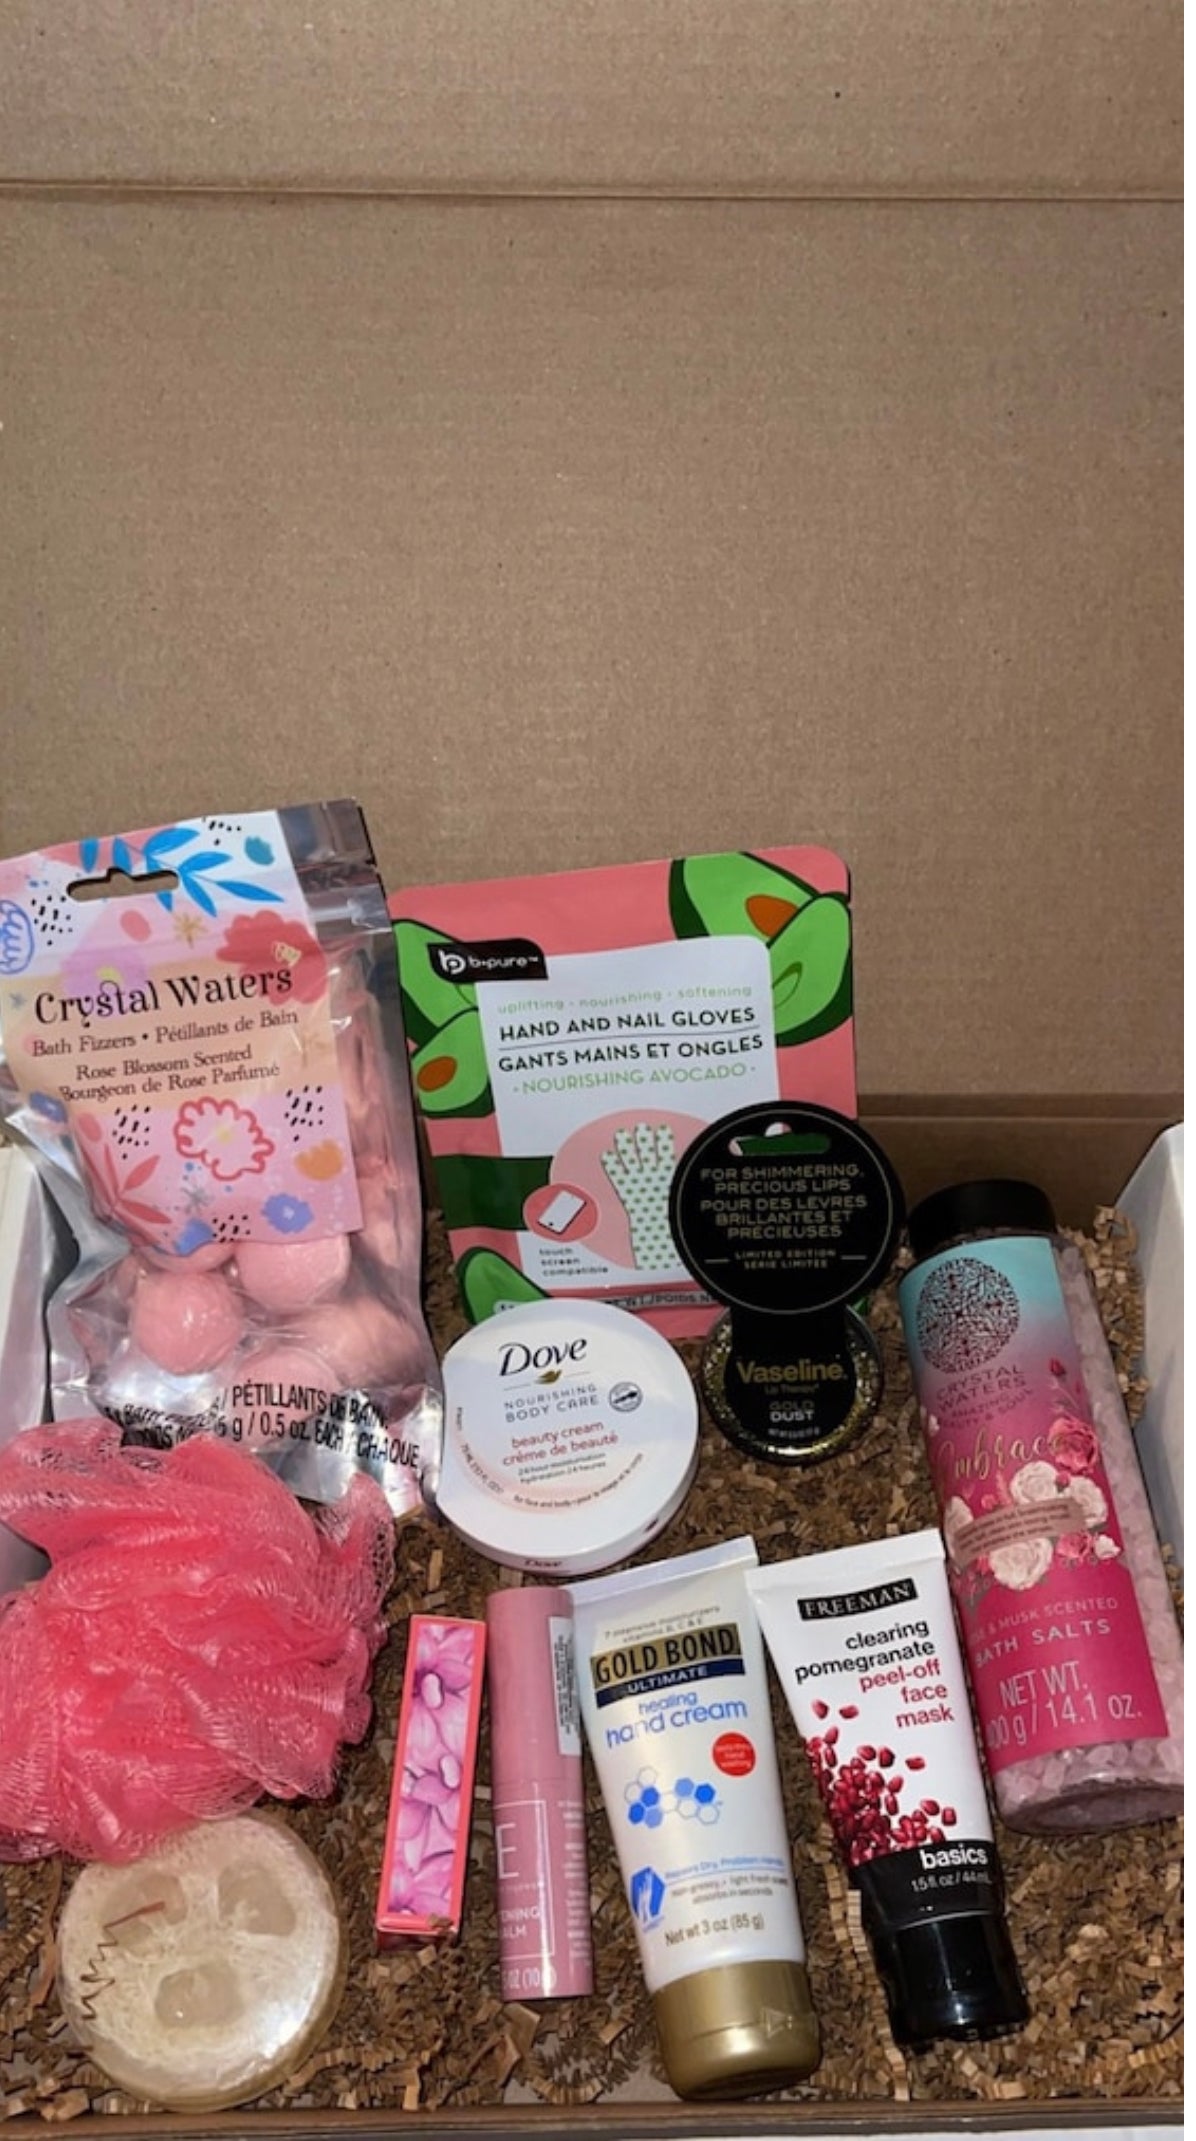 11 Pc body & bath spa gift set Box Valentine’s Day Birthday Shower Thinking Of You Get well any occasion gift sets Free shipping